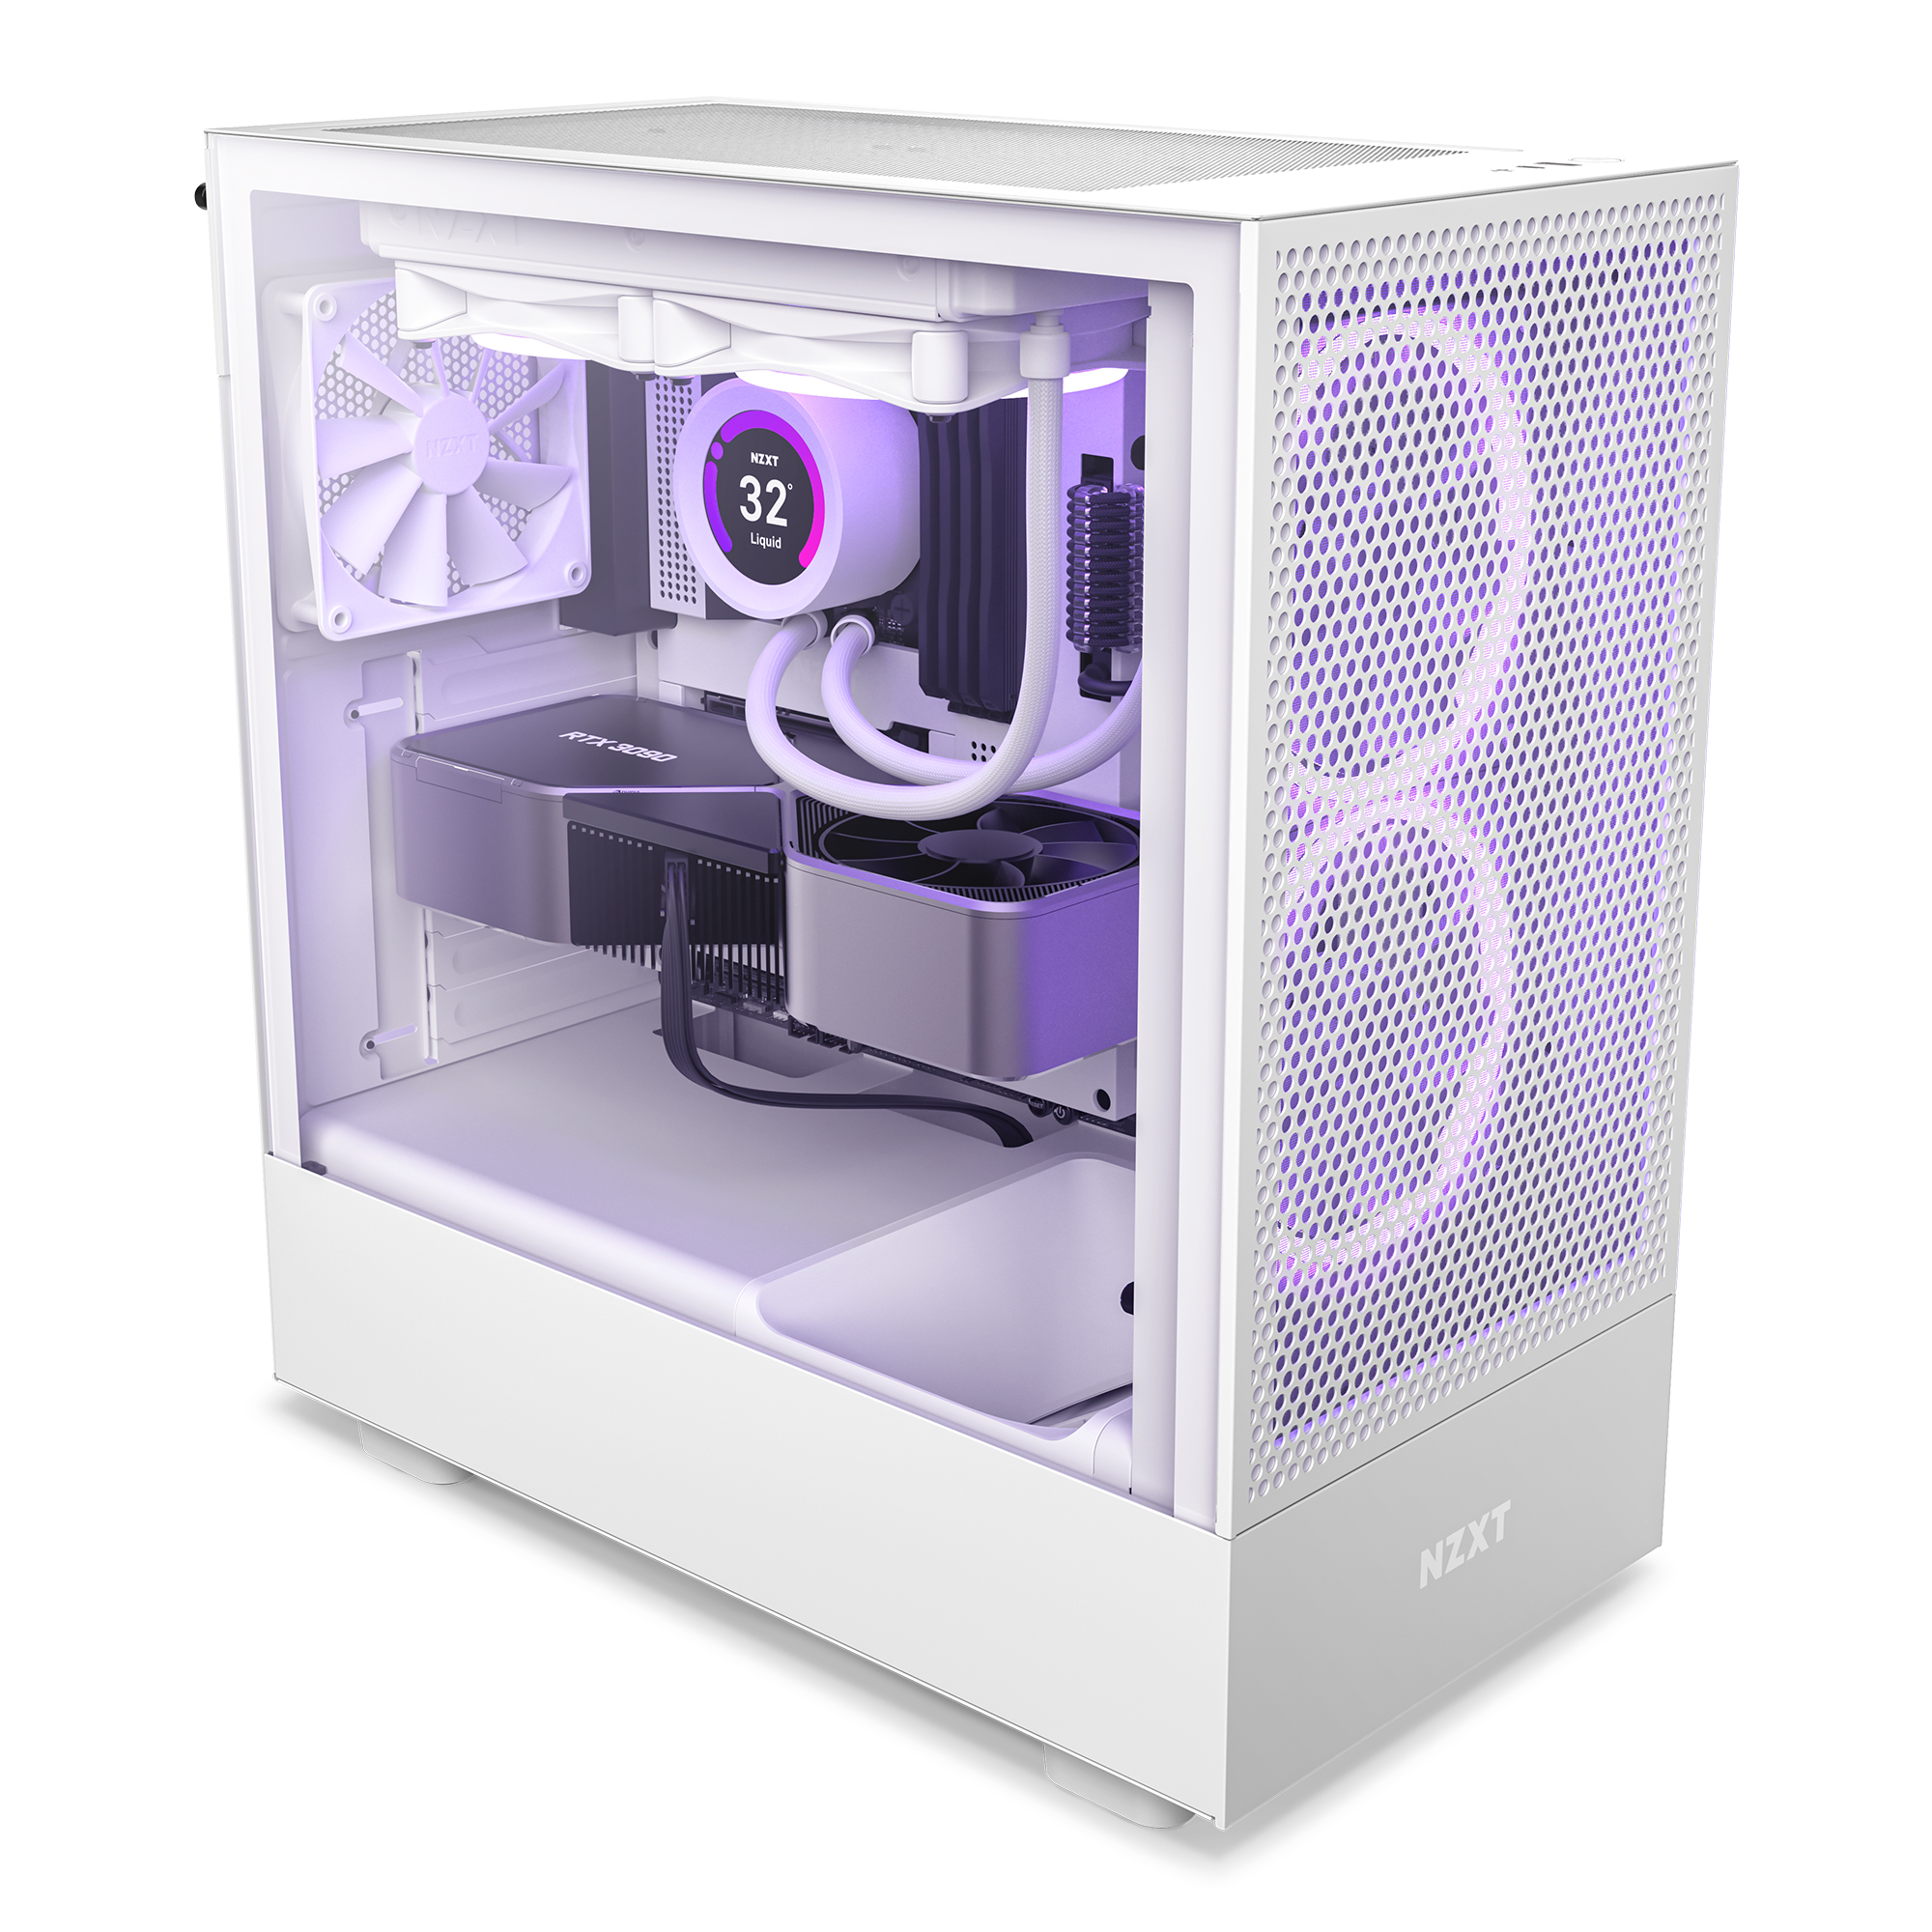 NZXT H5 Flow RGB Tempered Glass ATX Mid-Tower Computer Case